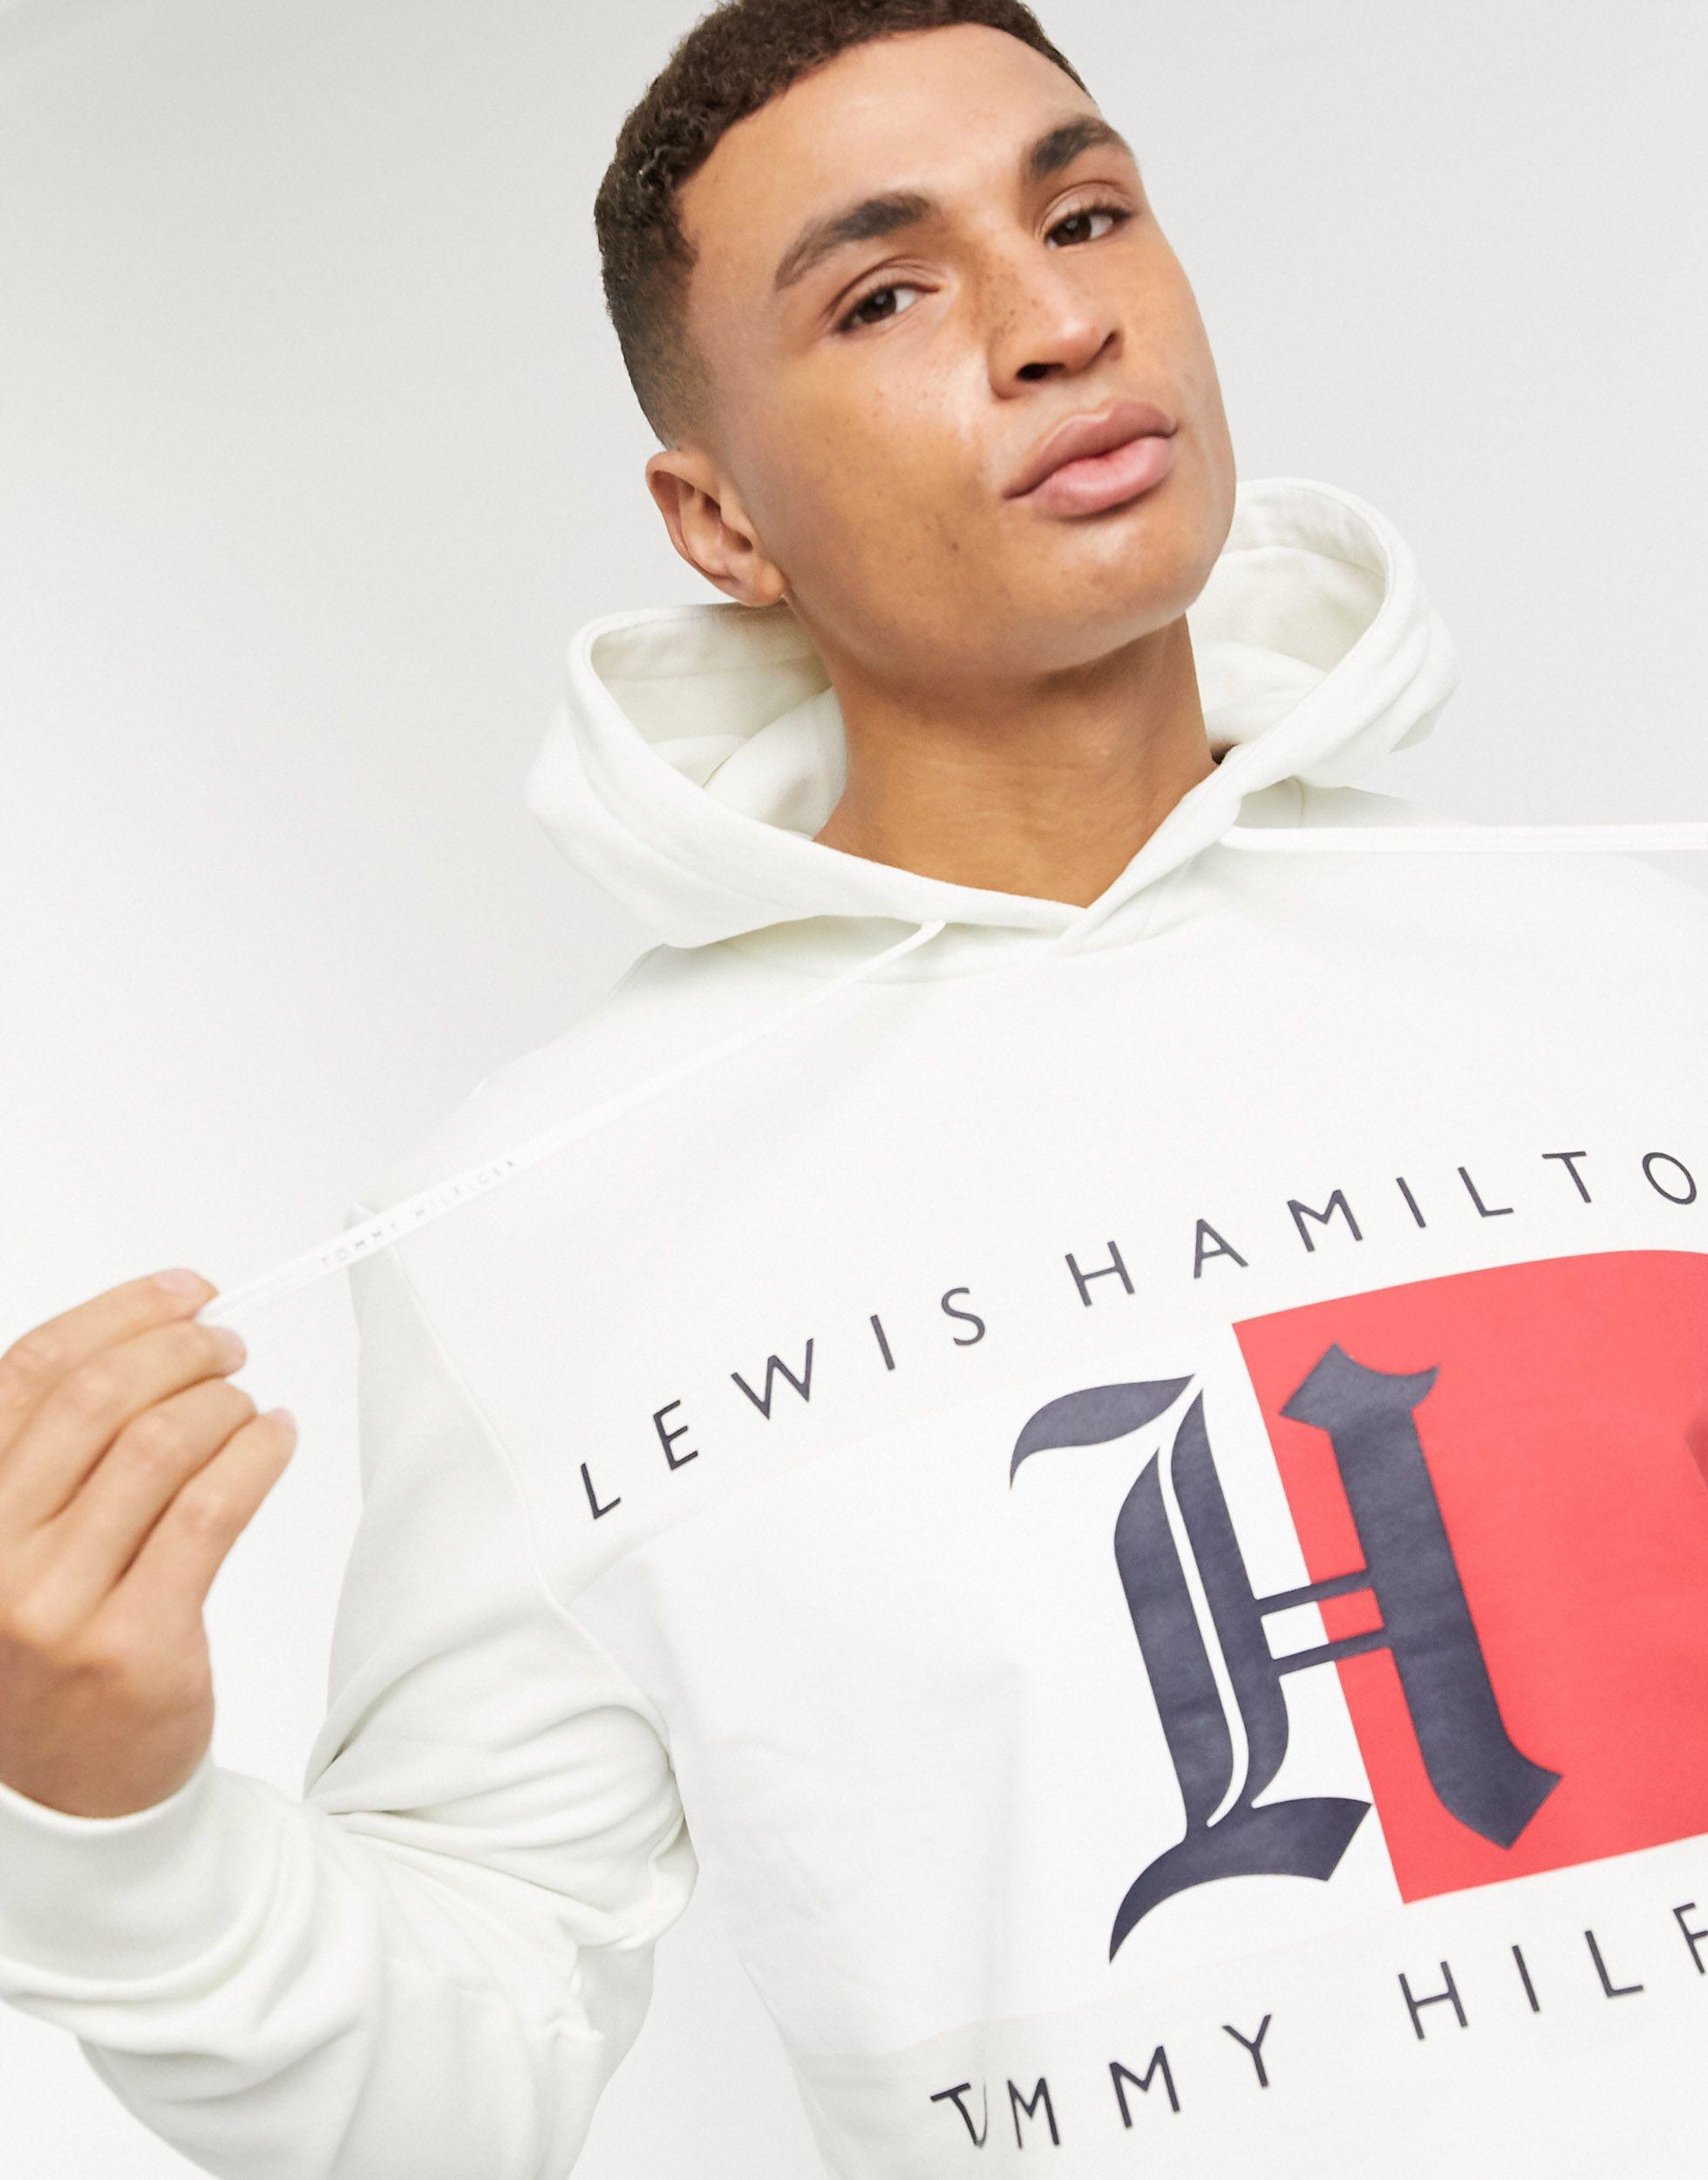 Tommy Logo Hoodie, tommy 